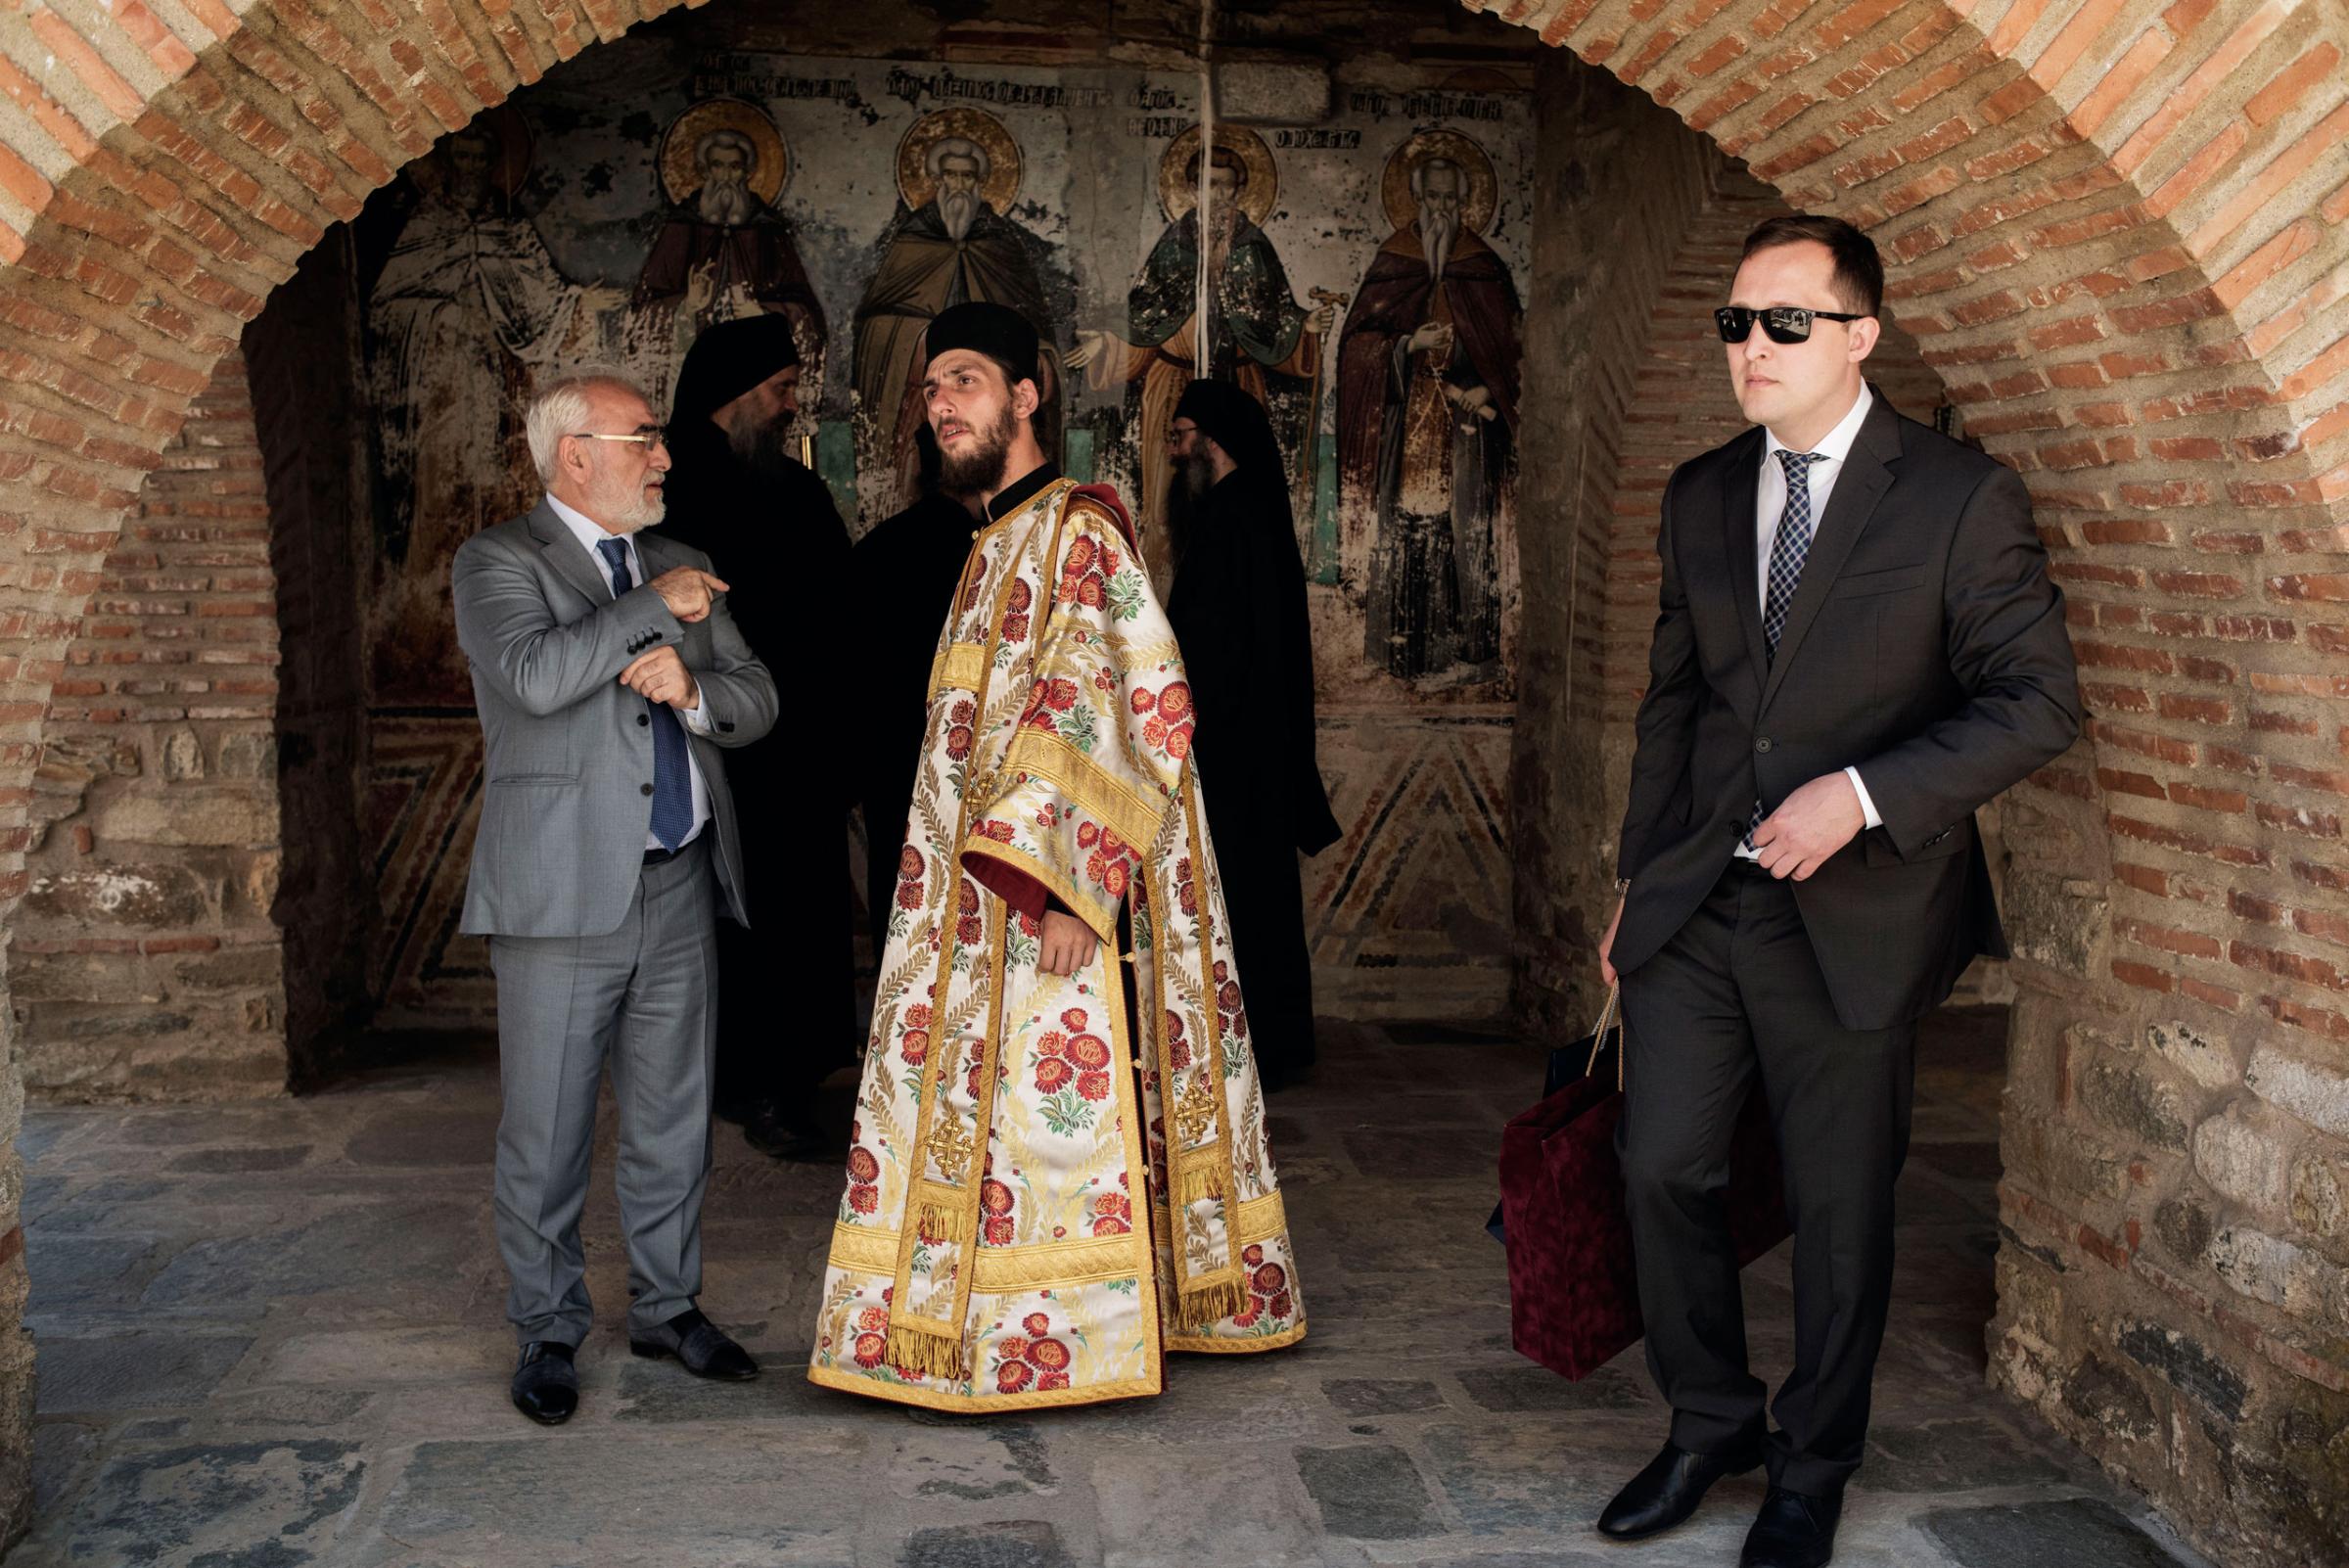 Monks and laymen stand outside the Protaton, the oldest church on Mount Athos, a self-governing monastic community in northern Greece, May 28, 2016.